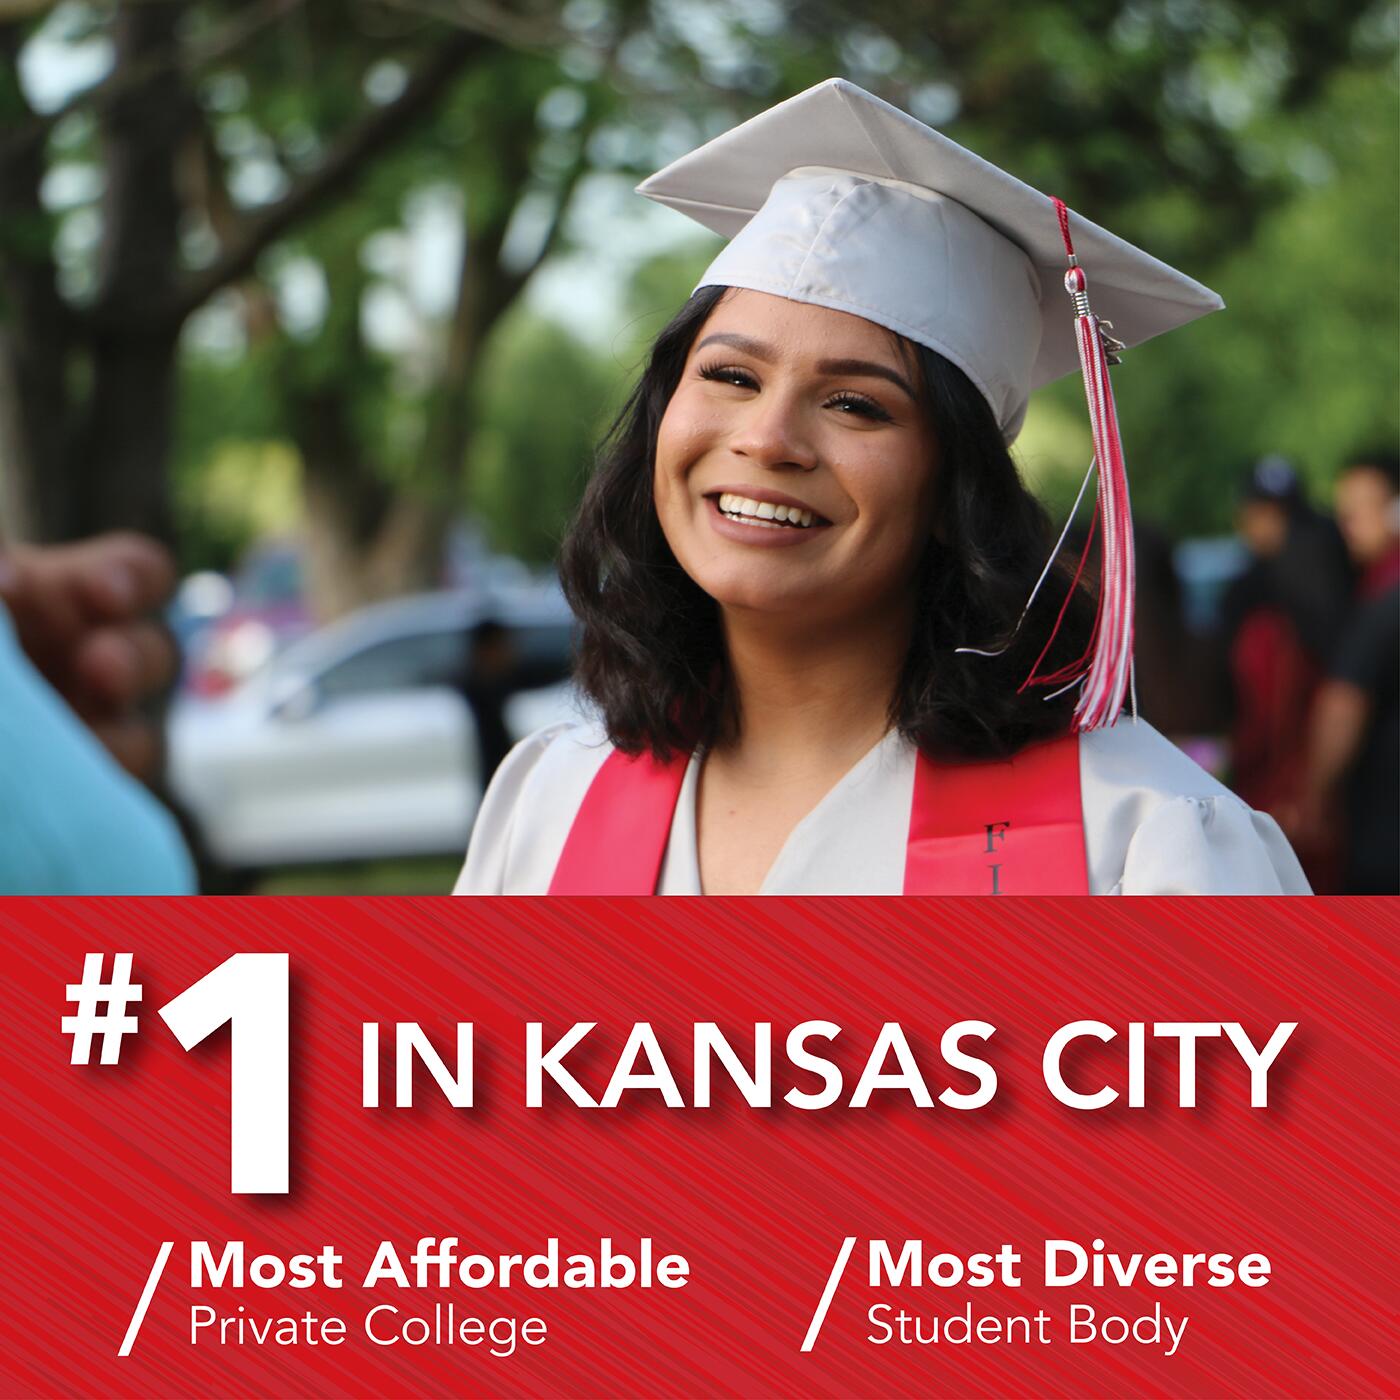 Donnelly is the most affordable private college in Kansas City.